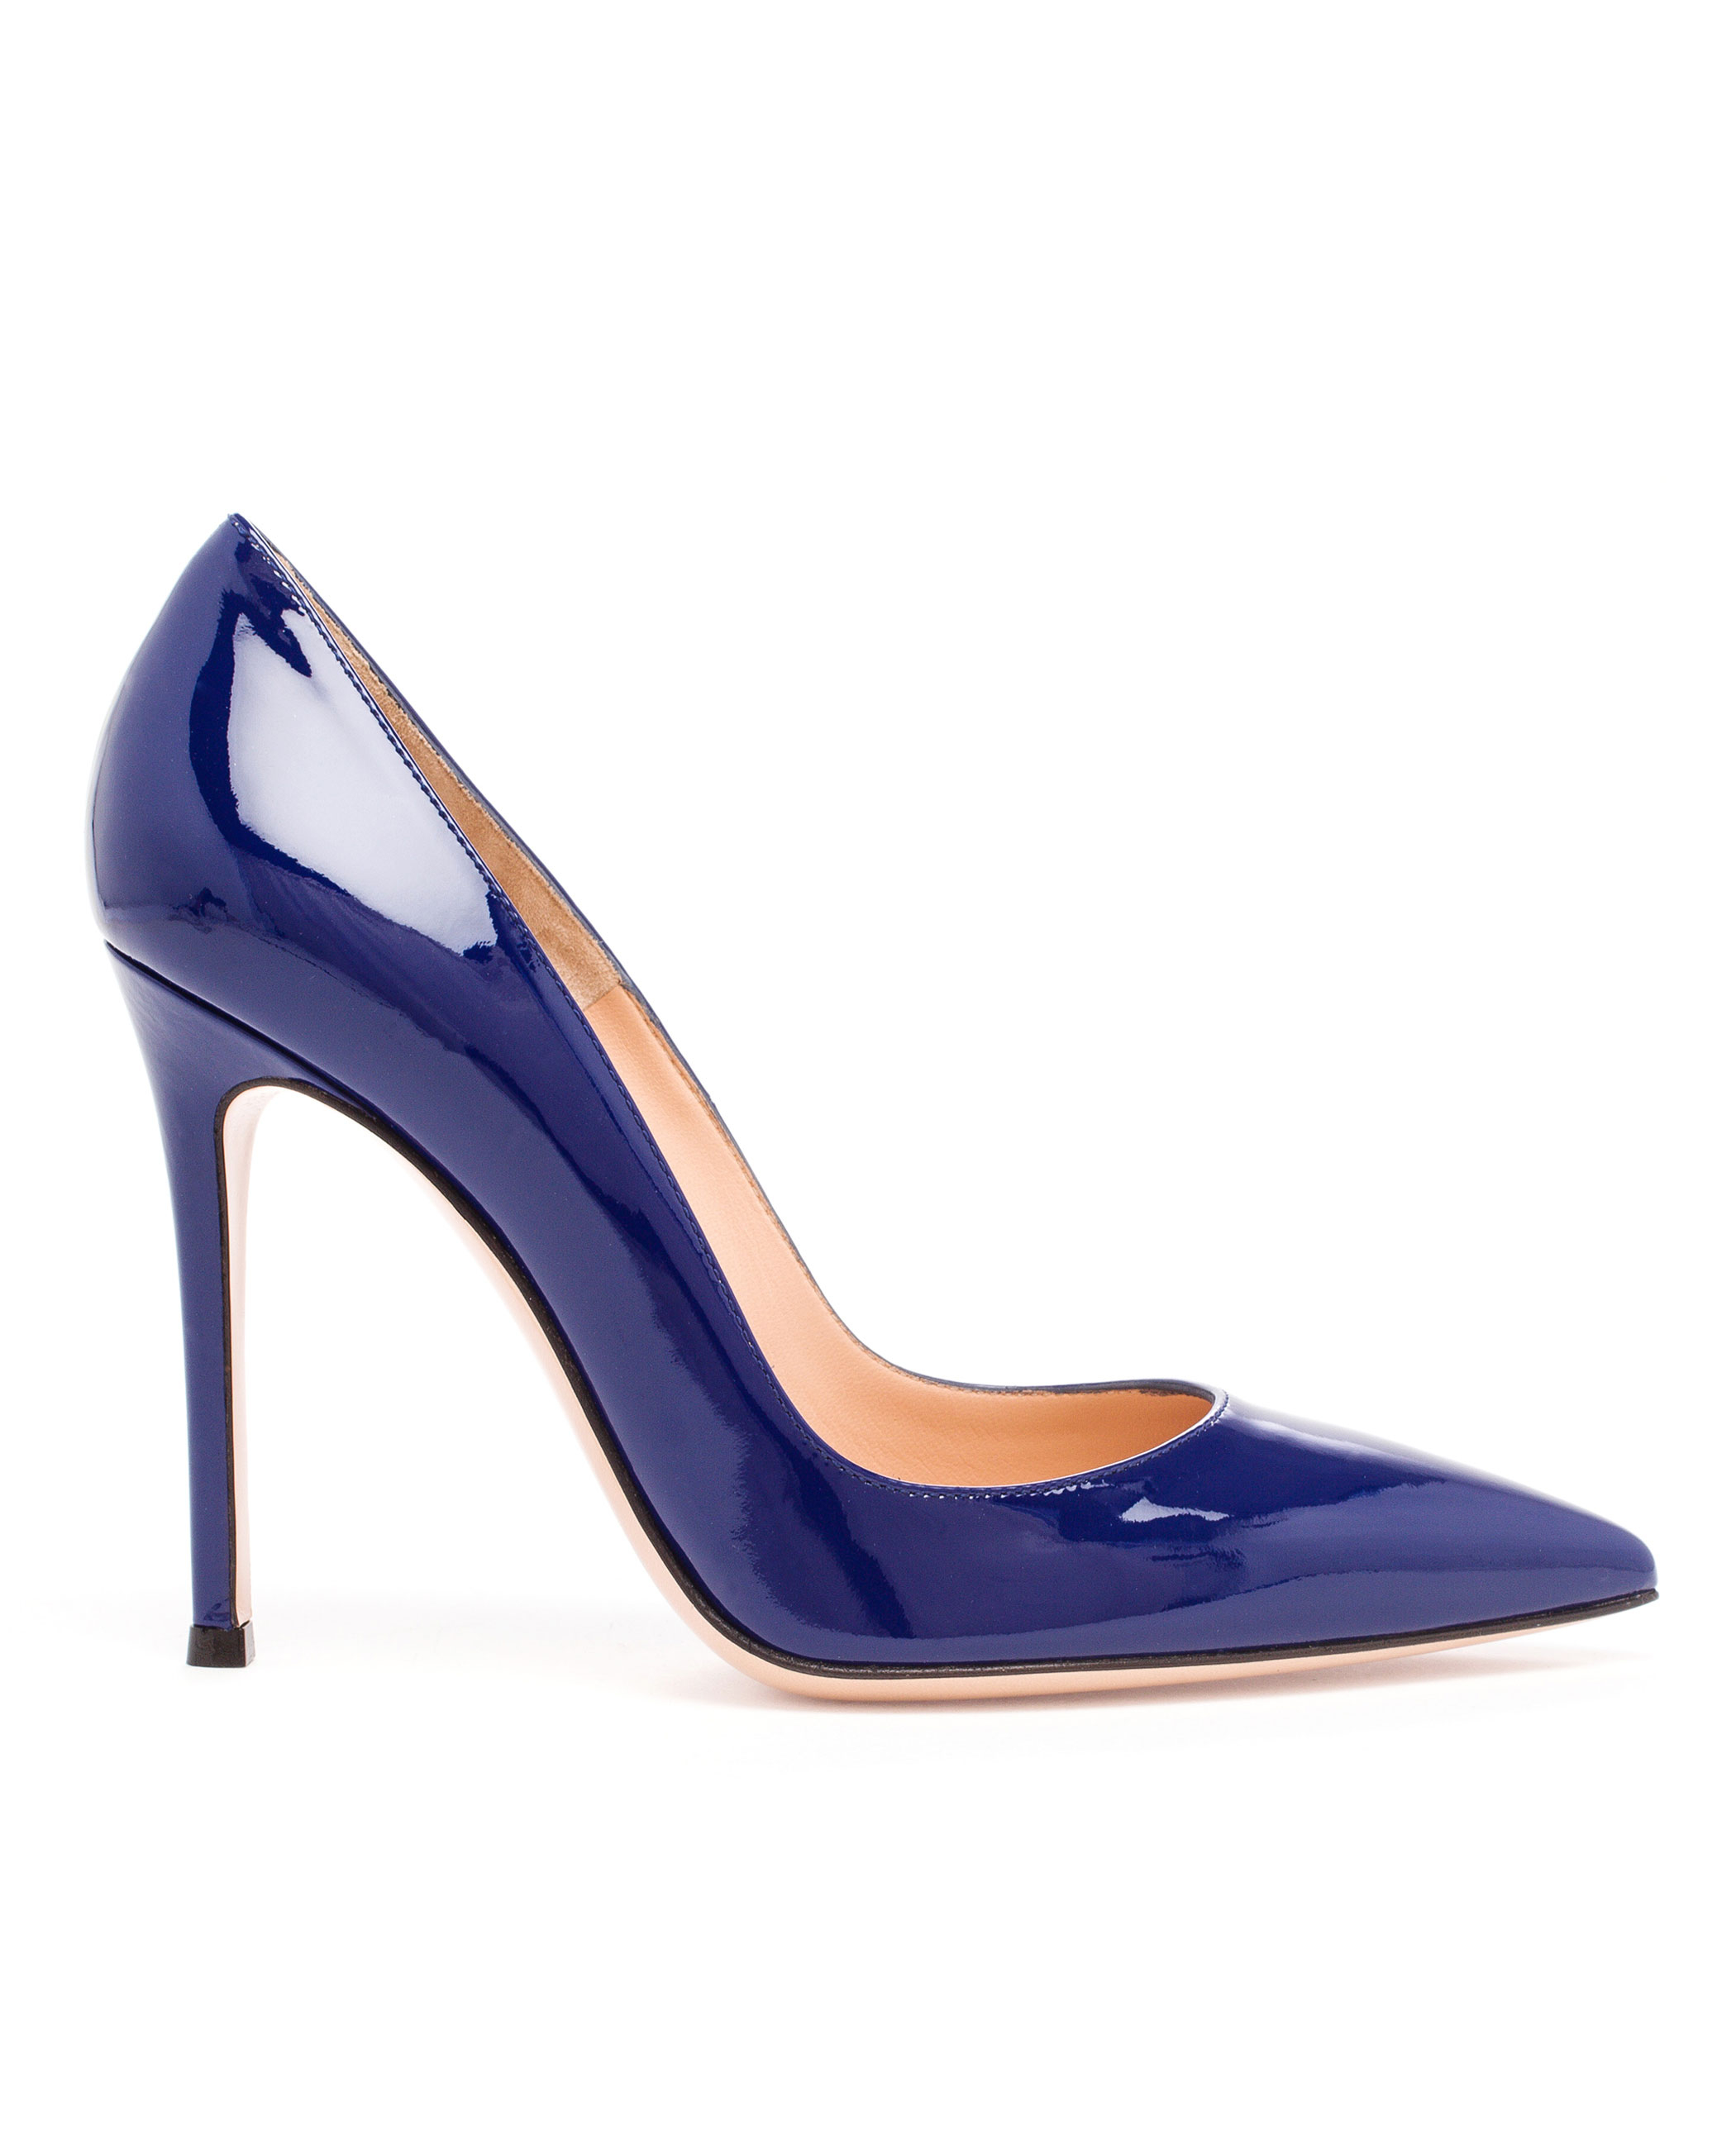 Gianvito Rossi Patent Pumps in Navy (Blue) - Lyst